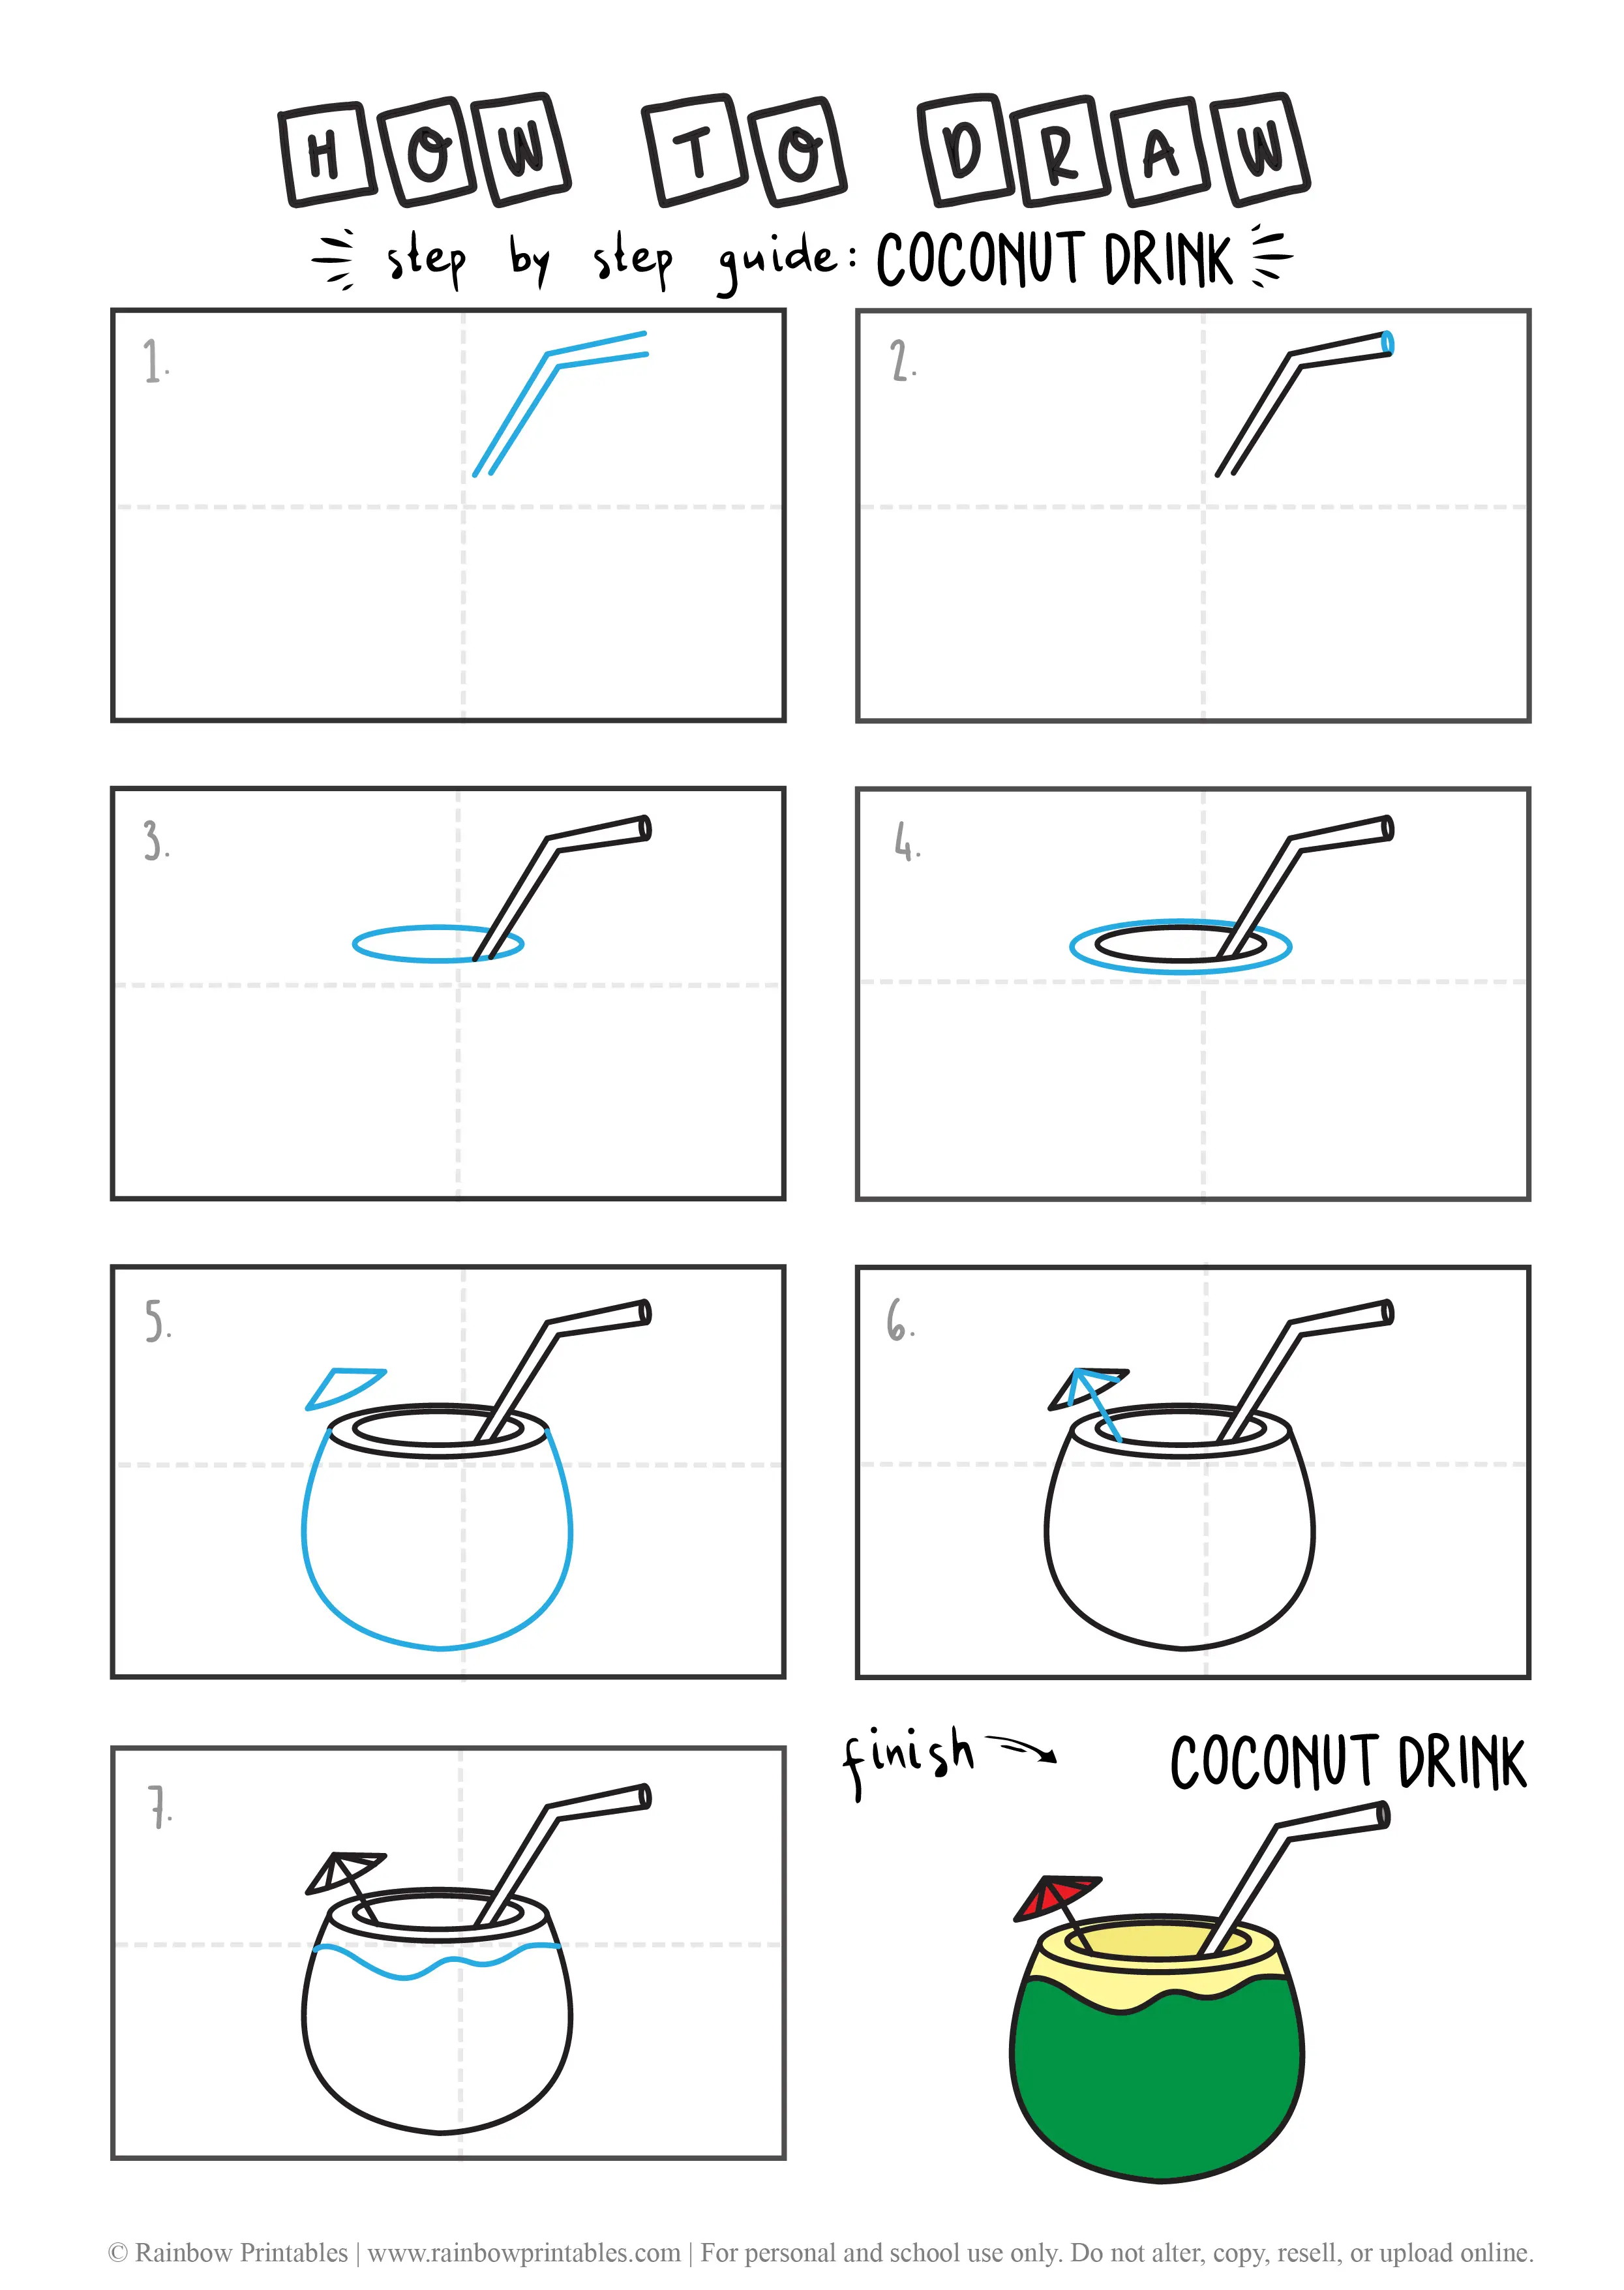 HOW TO DRAW COCONUT DRINK VACATION BEACH GUIDE ILLUSTRATION STEP BY STEP EASY SIMPLE FOR KIDS